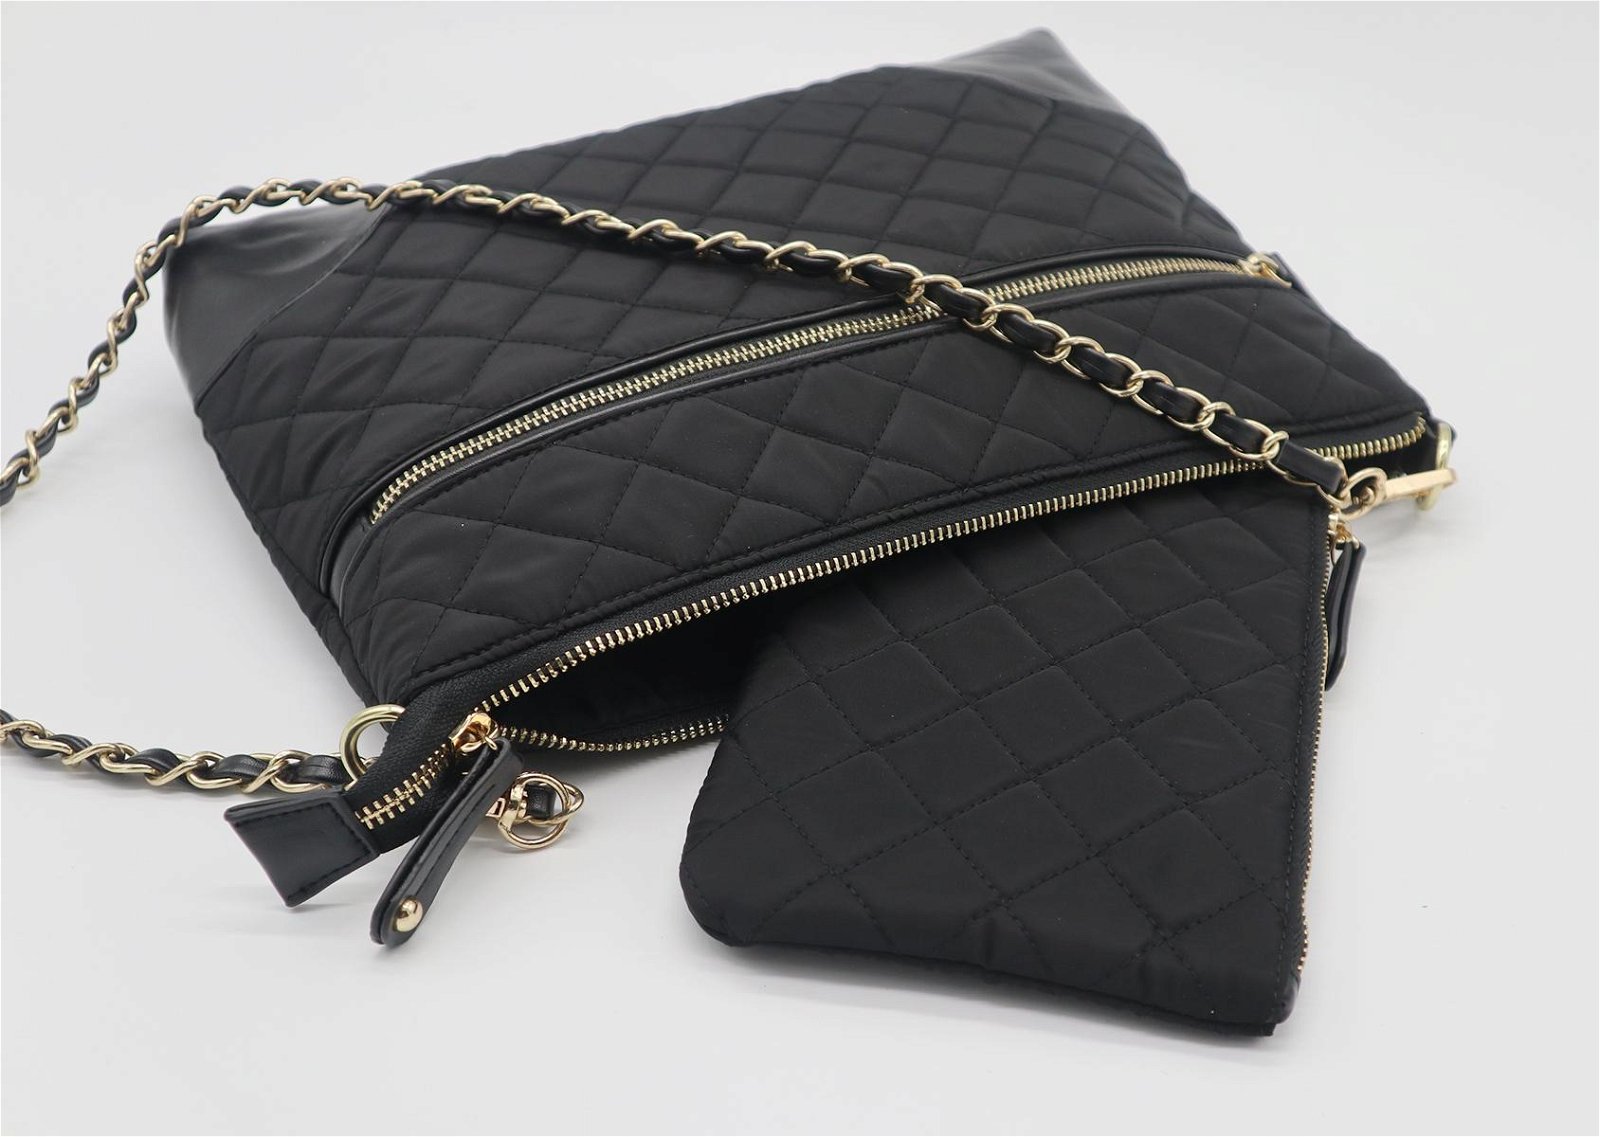 Quilted waterproof beauty women shoulder handbag with inner small clutch pouch 5